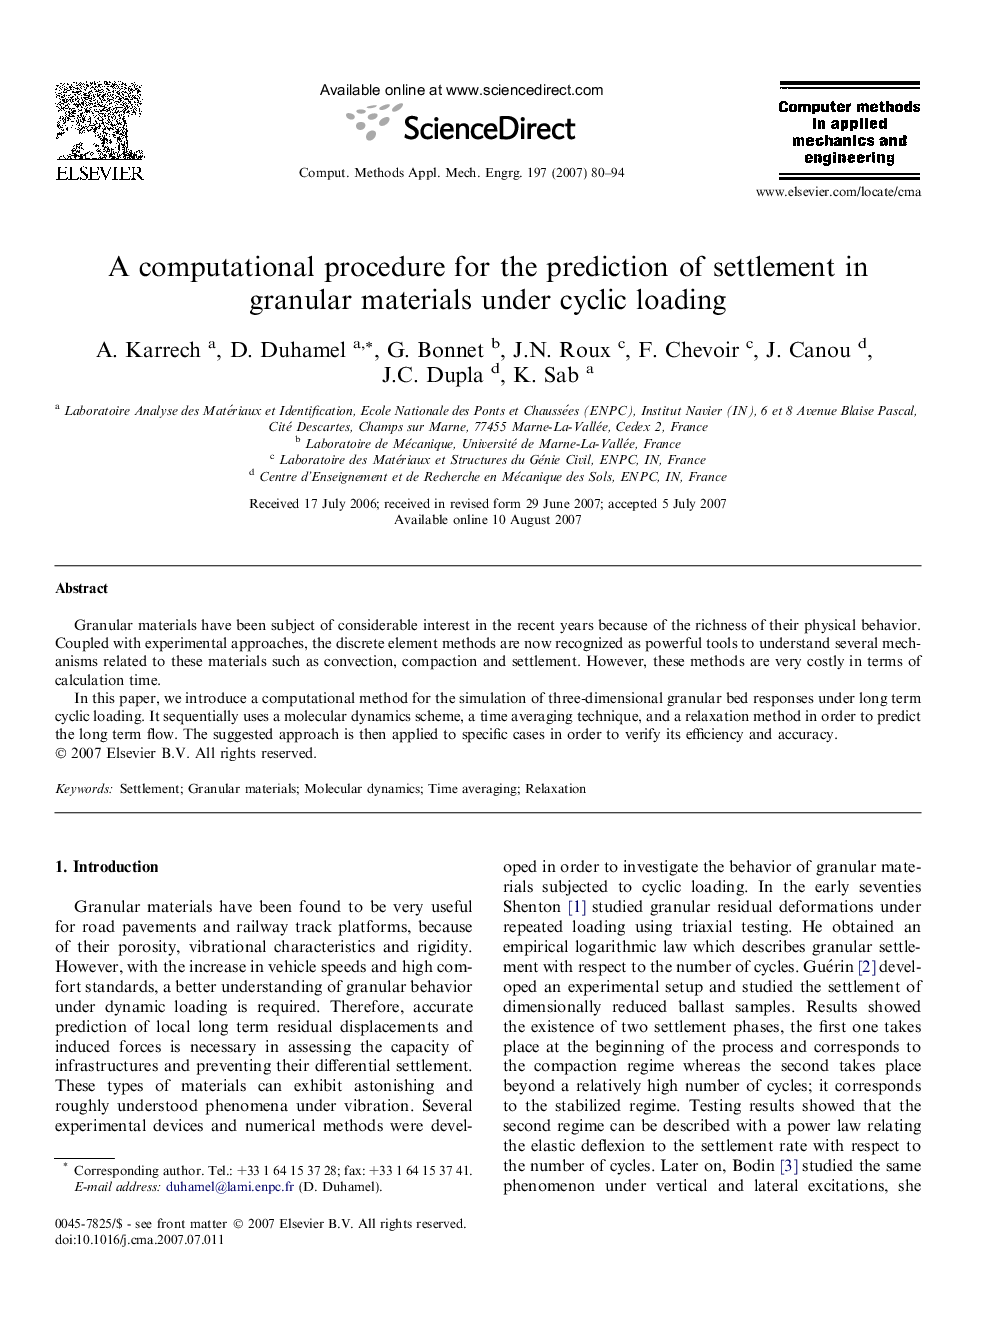 A computational procedure for the prediction of settlement in granular materials under cyclic loading